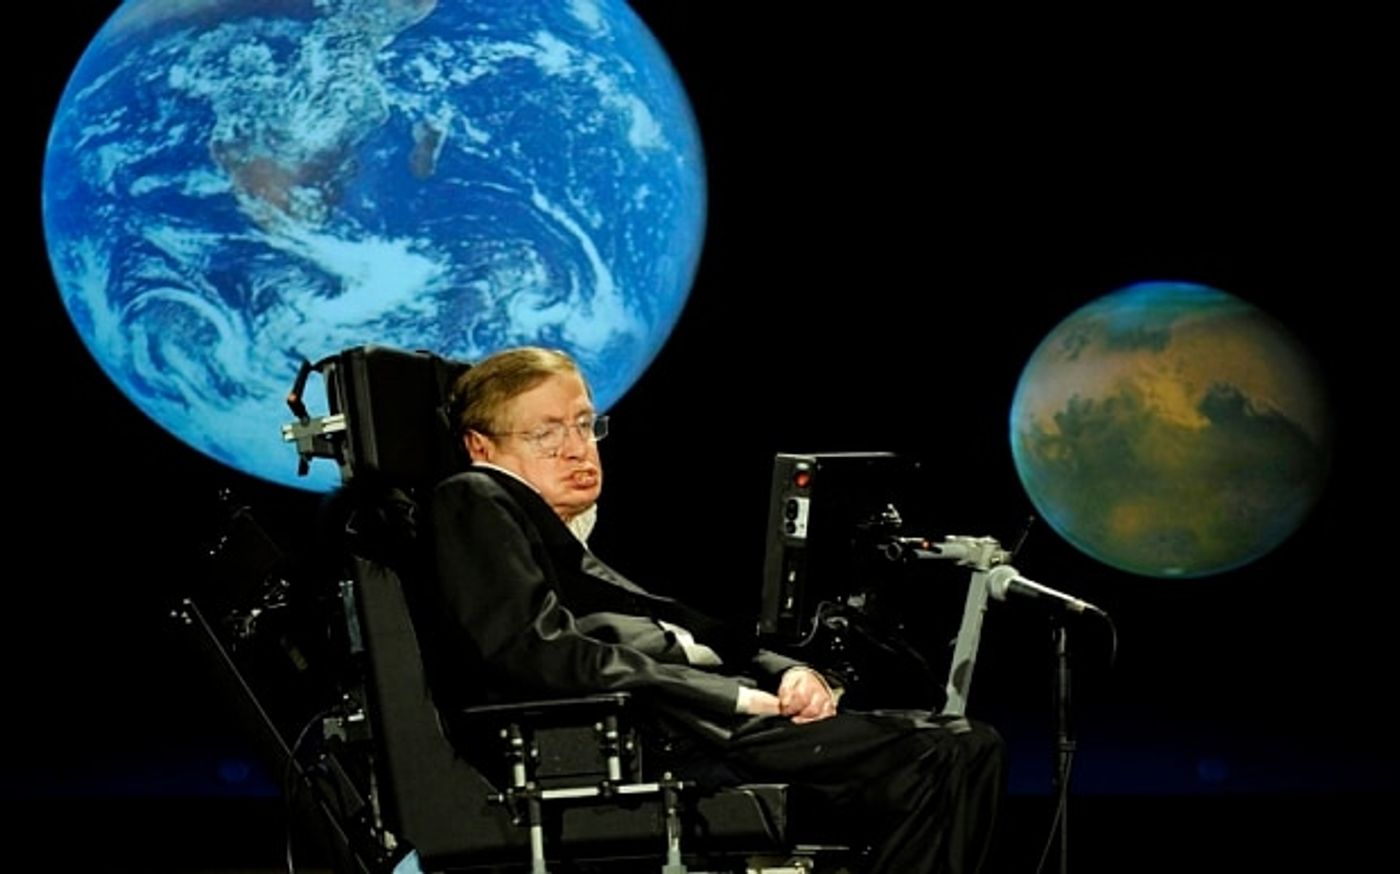 Stephen Hawking believes we will need to colonize other planets to survive.